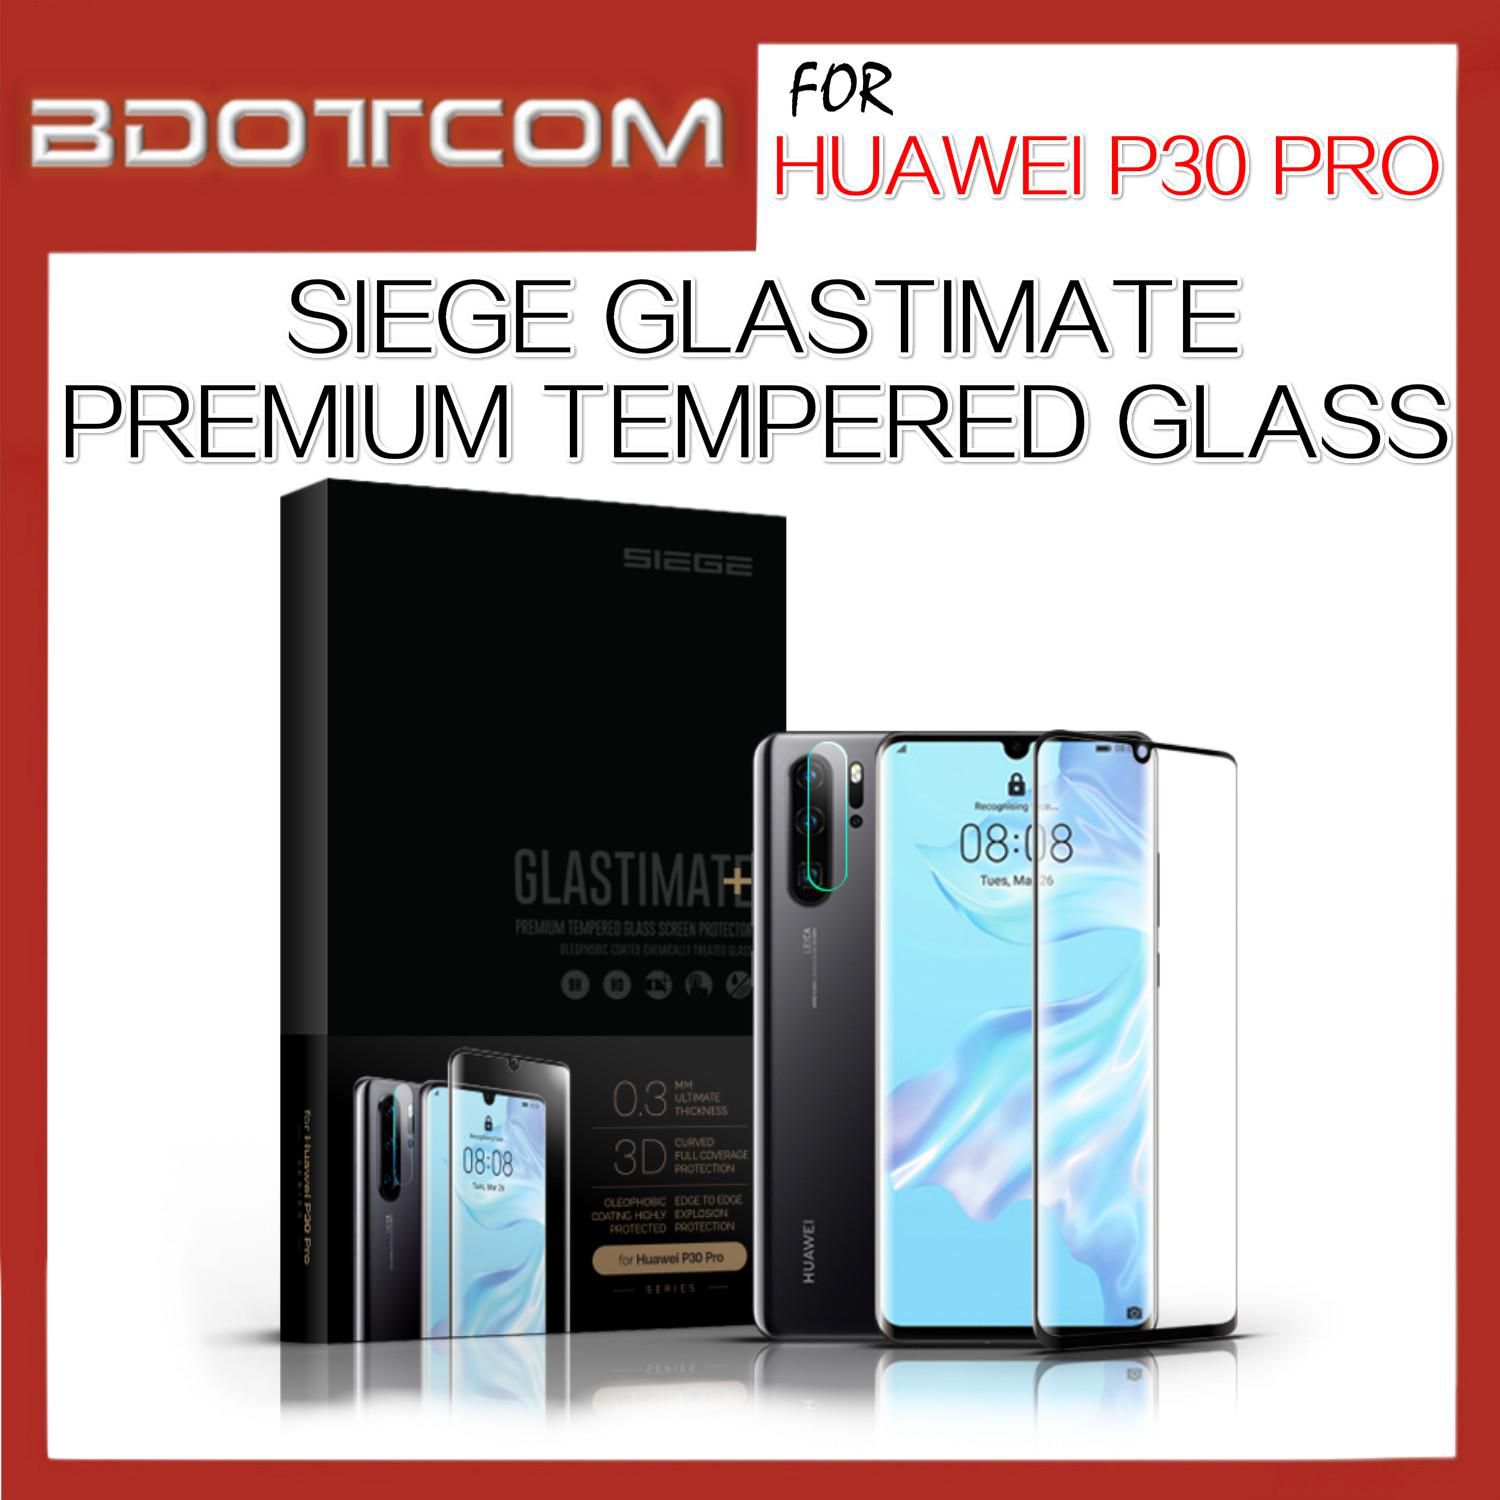 Huawei P30 Pro Siege Glastimate Plus 3D Full Covered Premium Tempered Glass